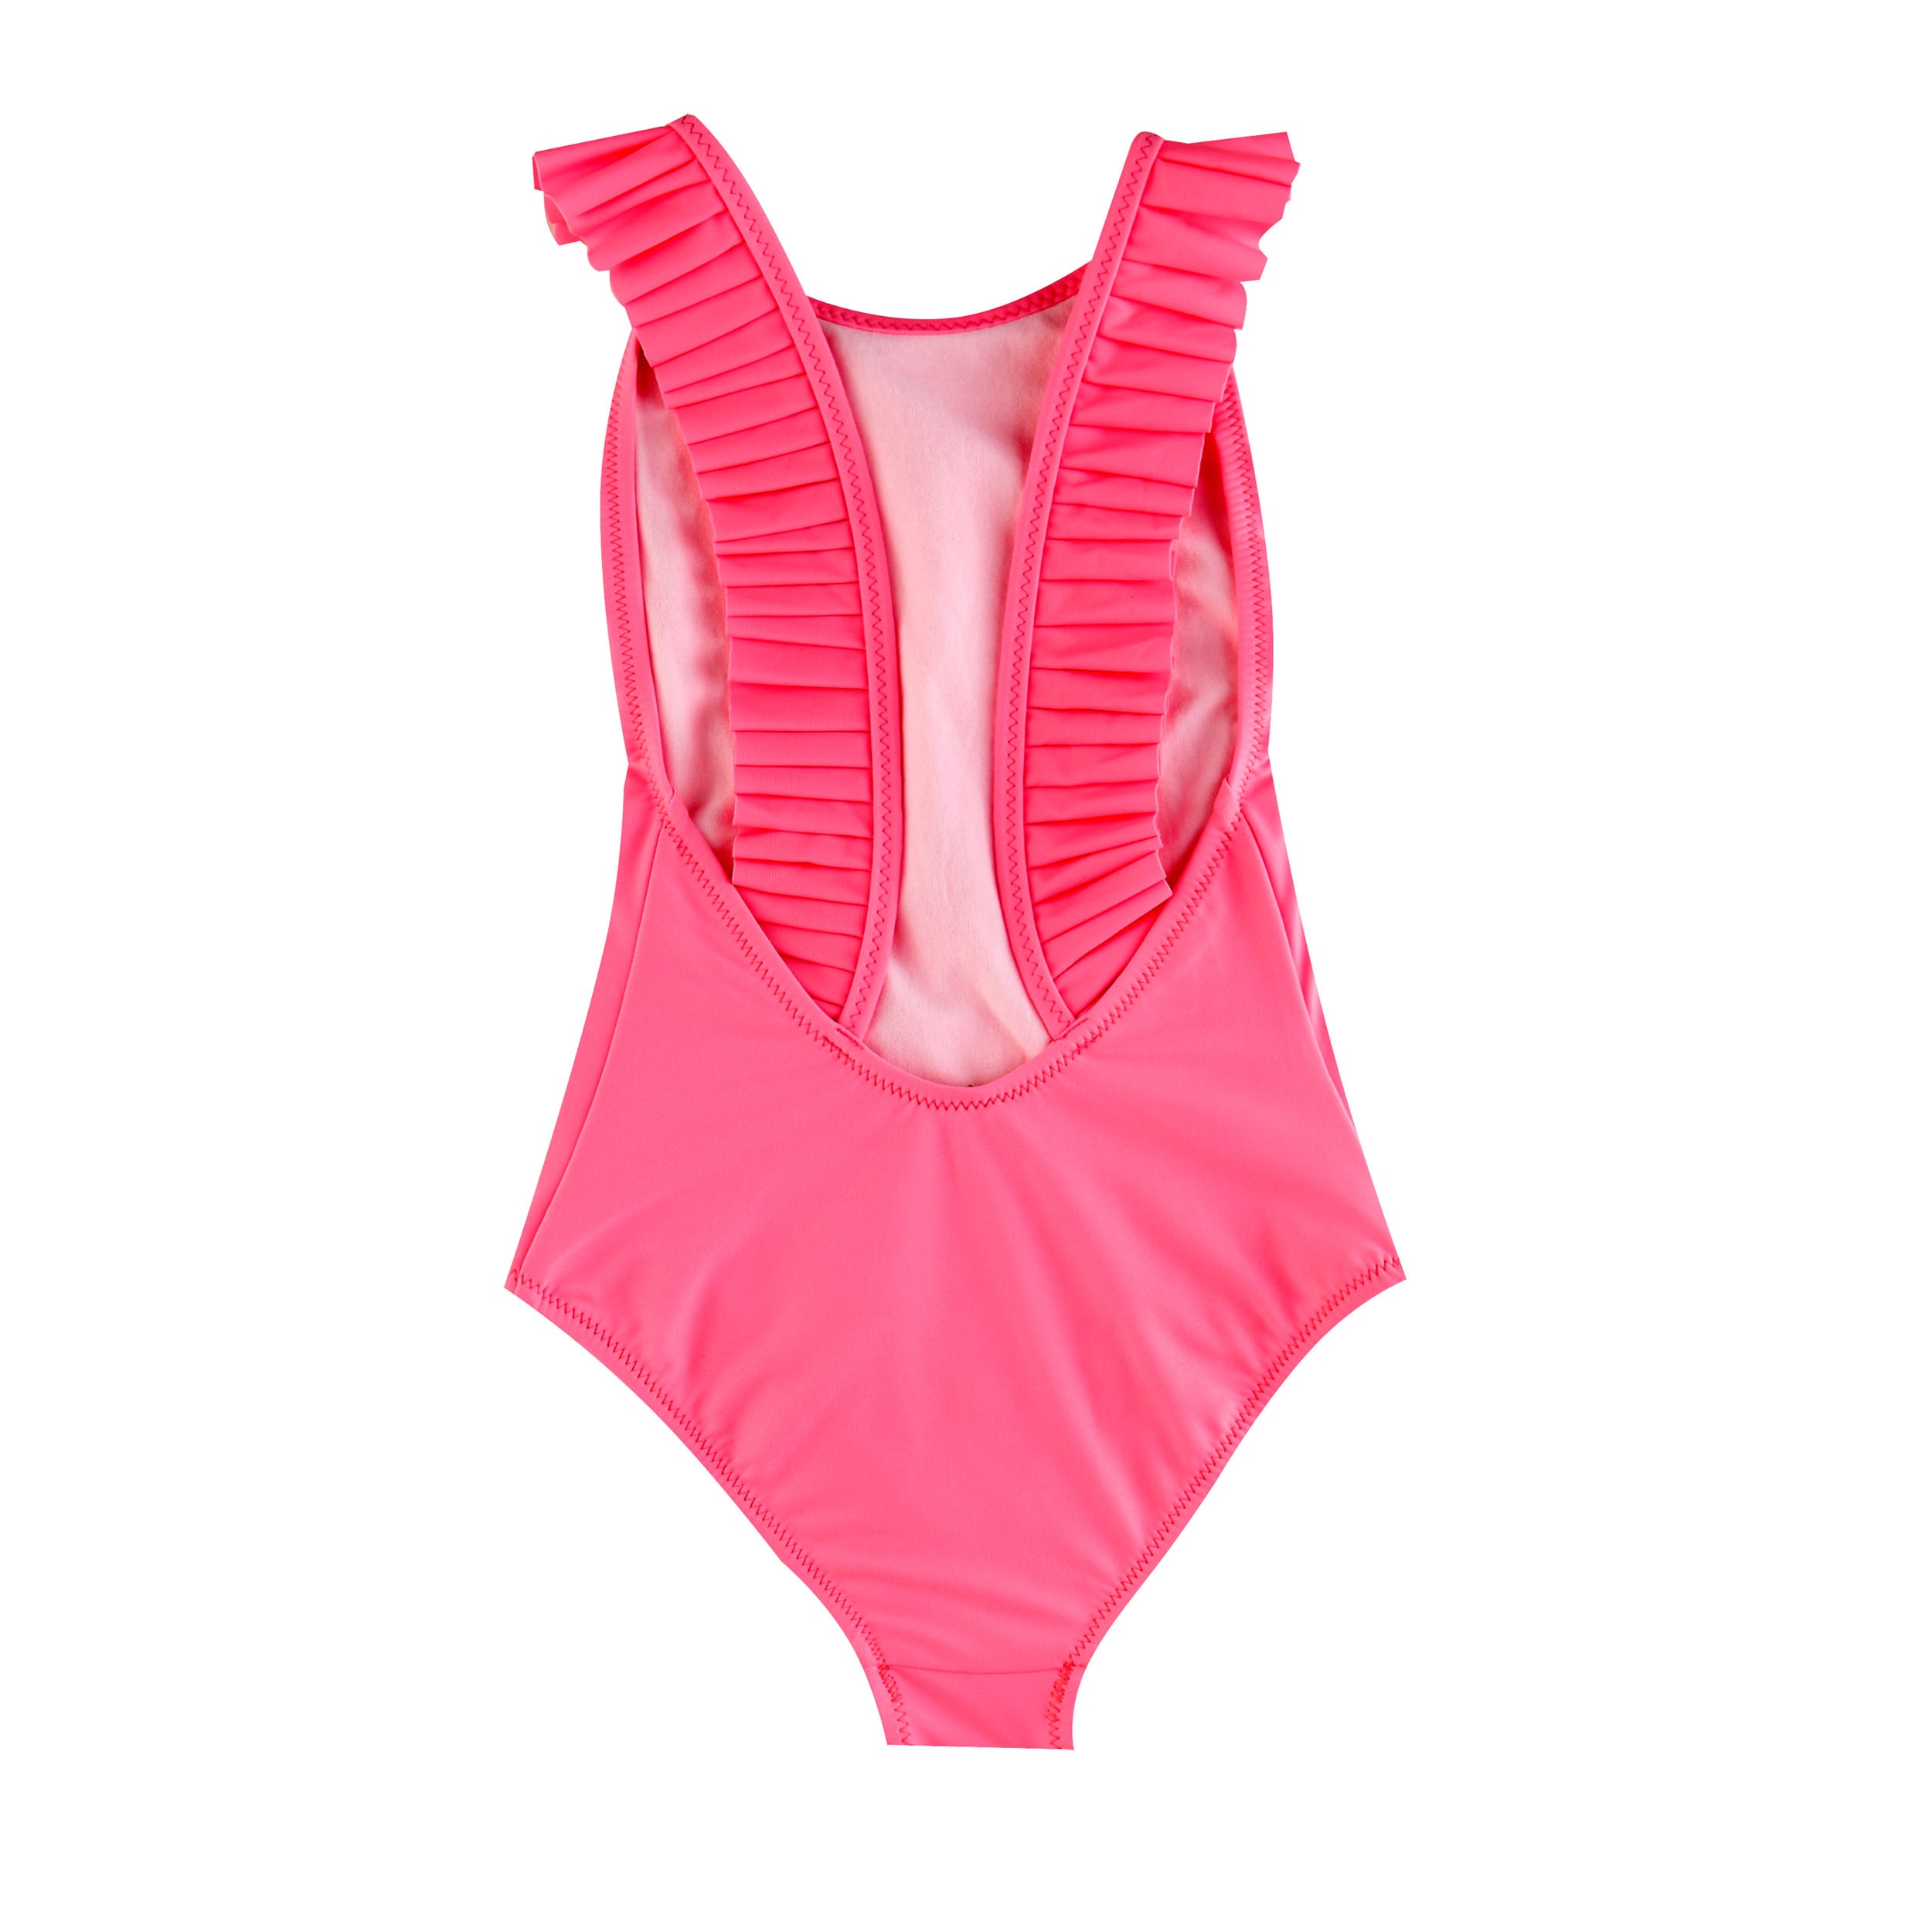 GIRL'S ONE PIECE PLEATED NEON PINK